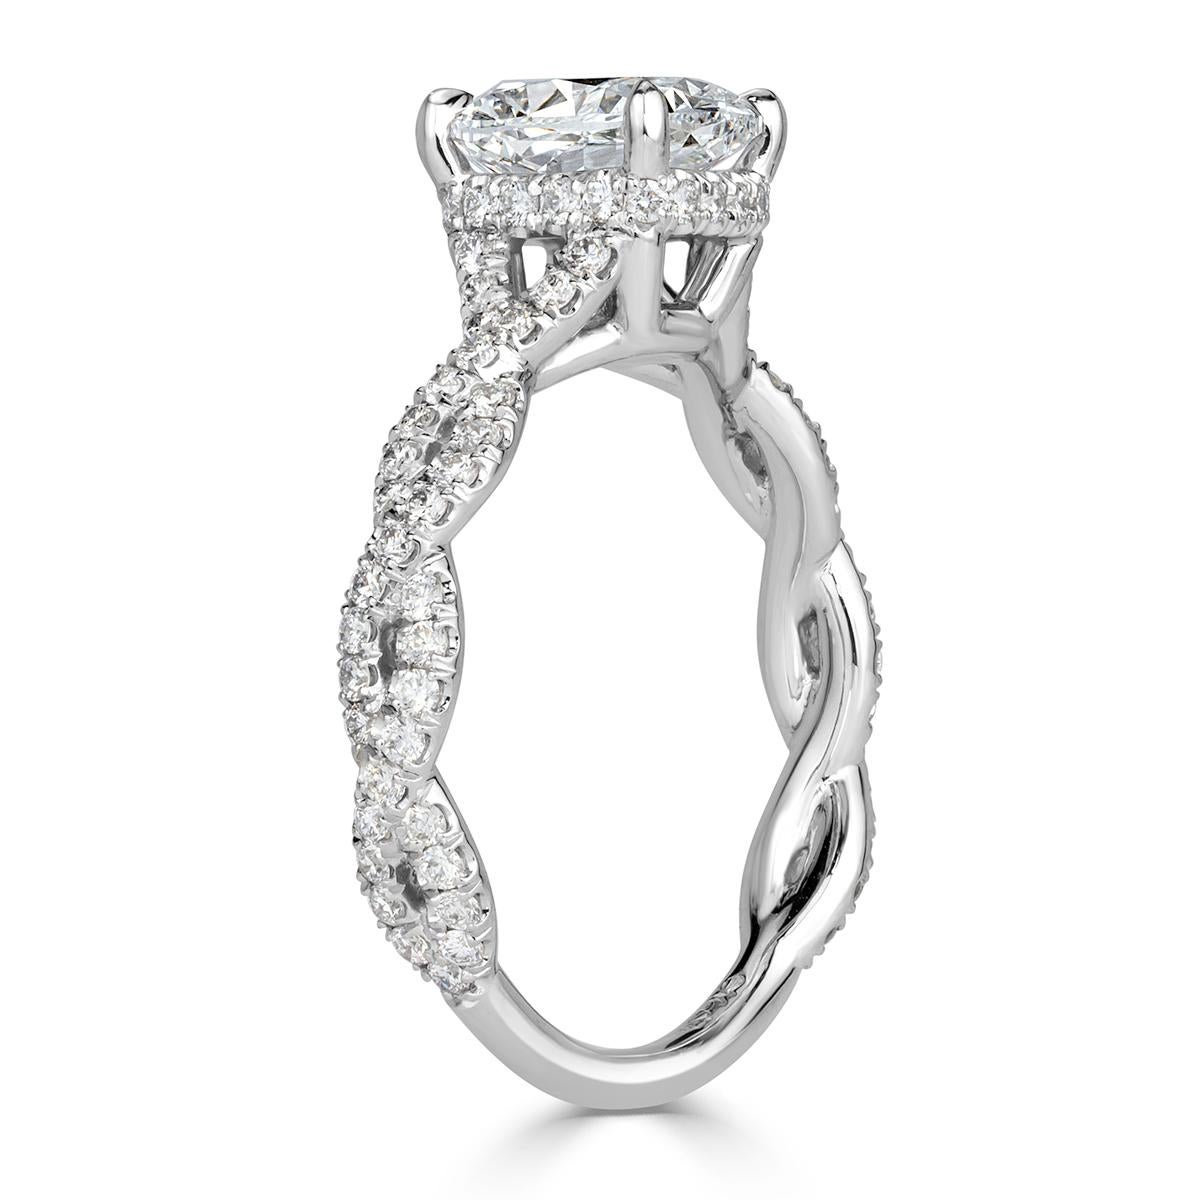 This mesmerizing diamond engagement ring showcases a stunning 1.50ct cushion cut center diamond, GIA certified at E-SI2. It is accented by a hidden halo and poised atop a feminine shank featuring a twist design embellished with round brilliant cut